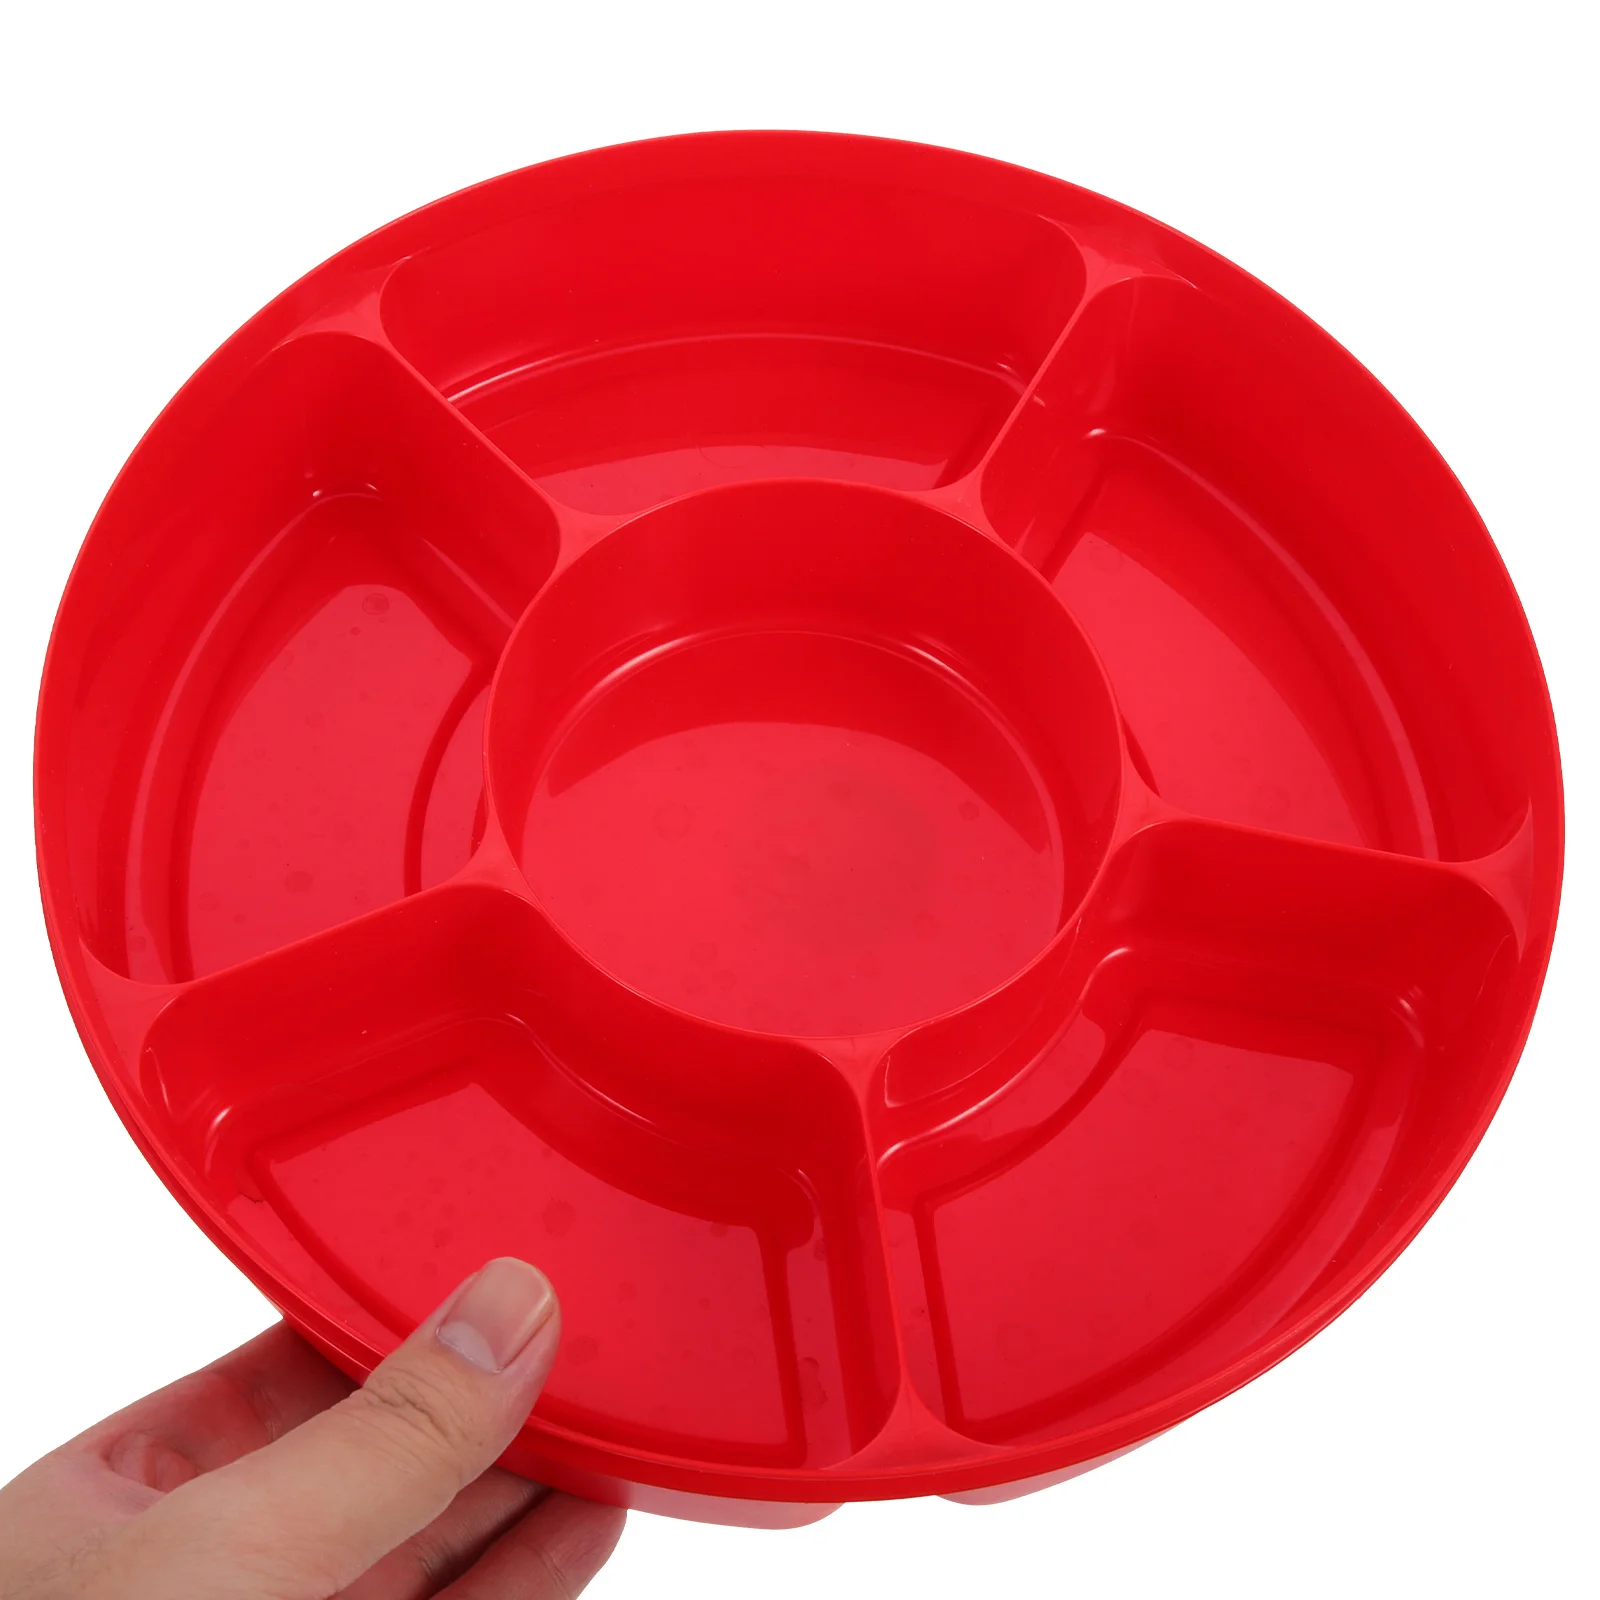 

Candy Nut Serving Container 6 Compartment Appetizer Tray Lid Round Plastic Food Storage Lunch Organizer Reusable Snack